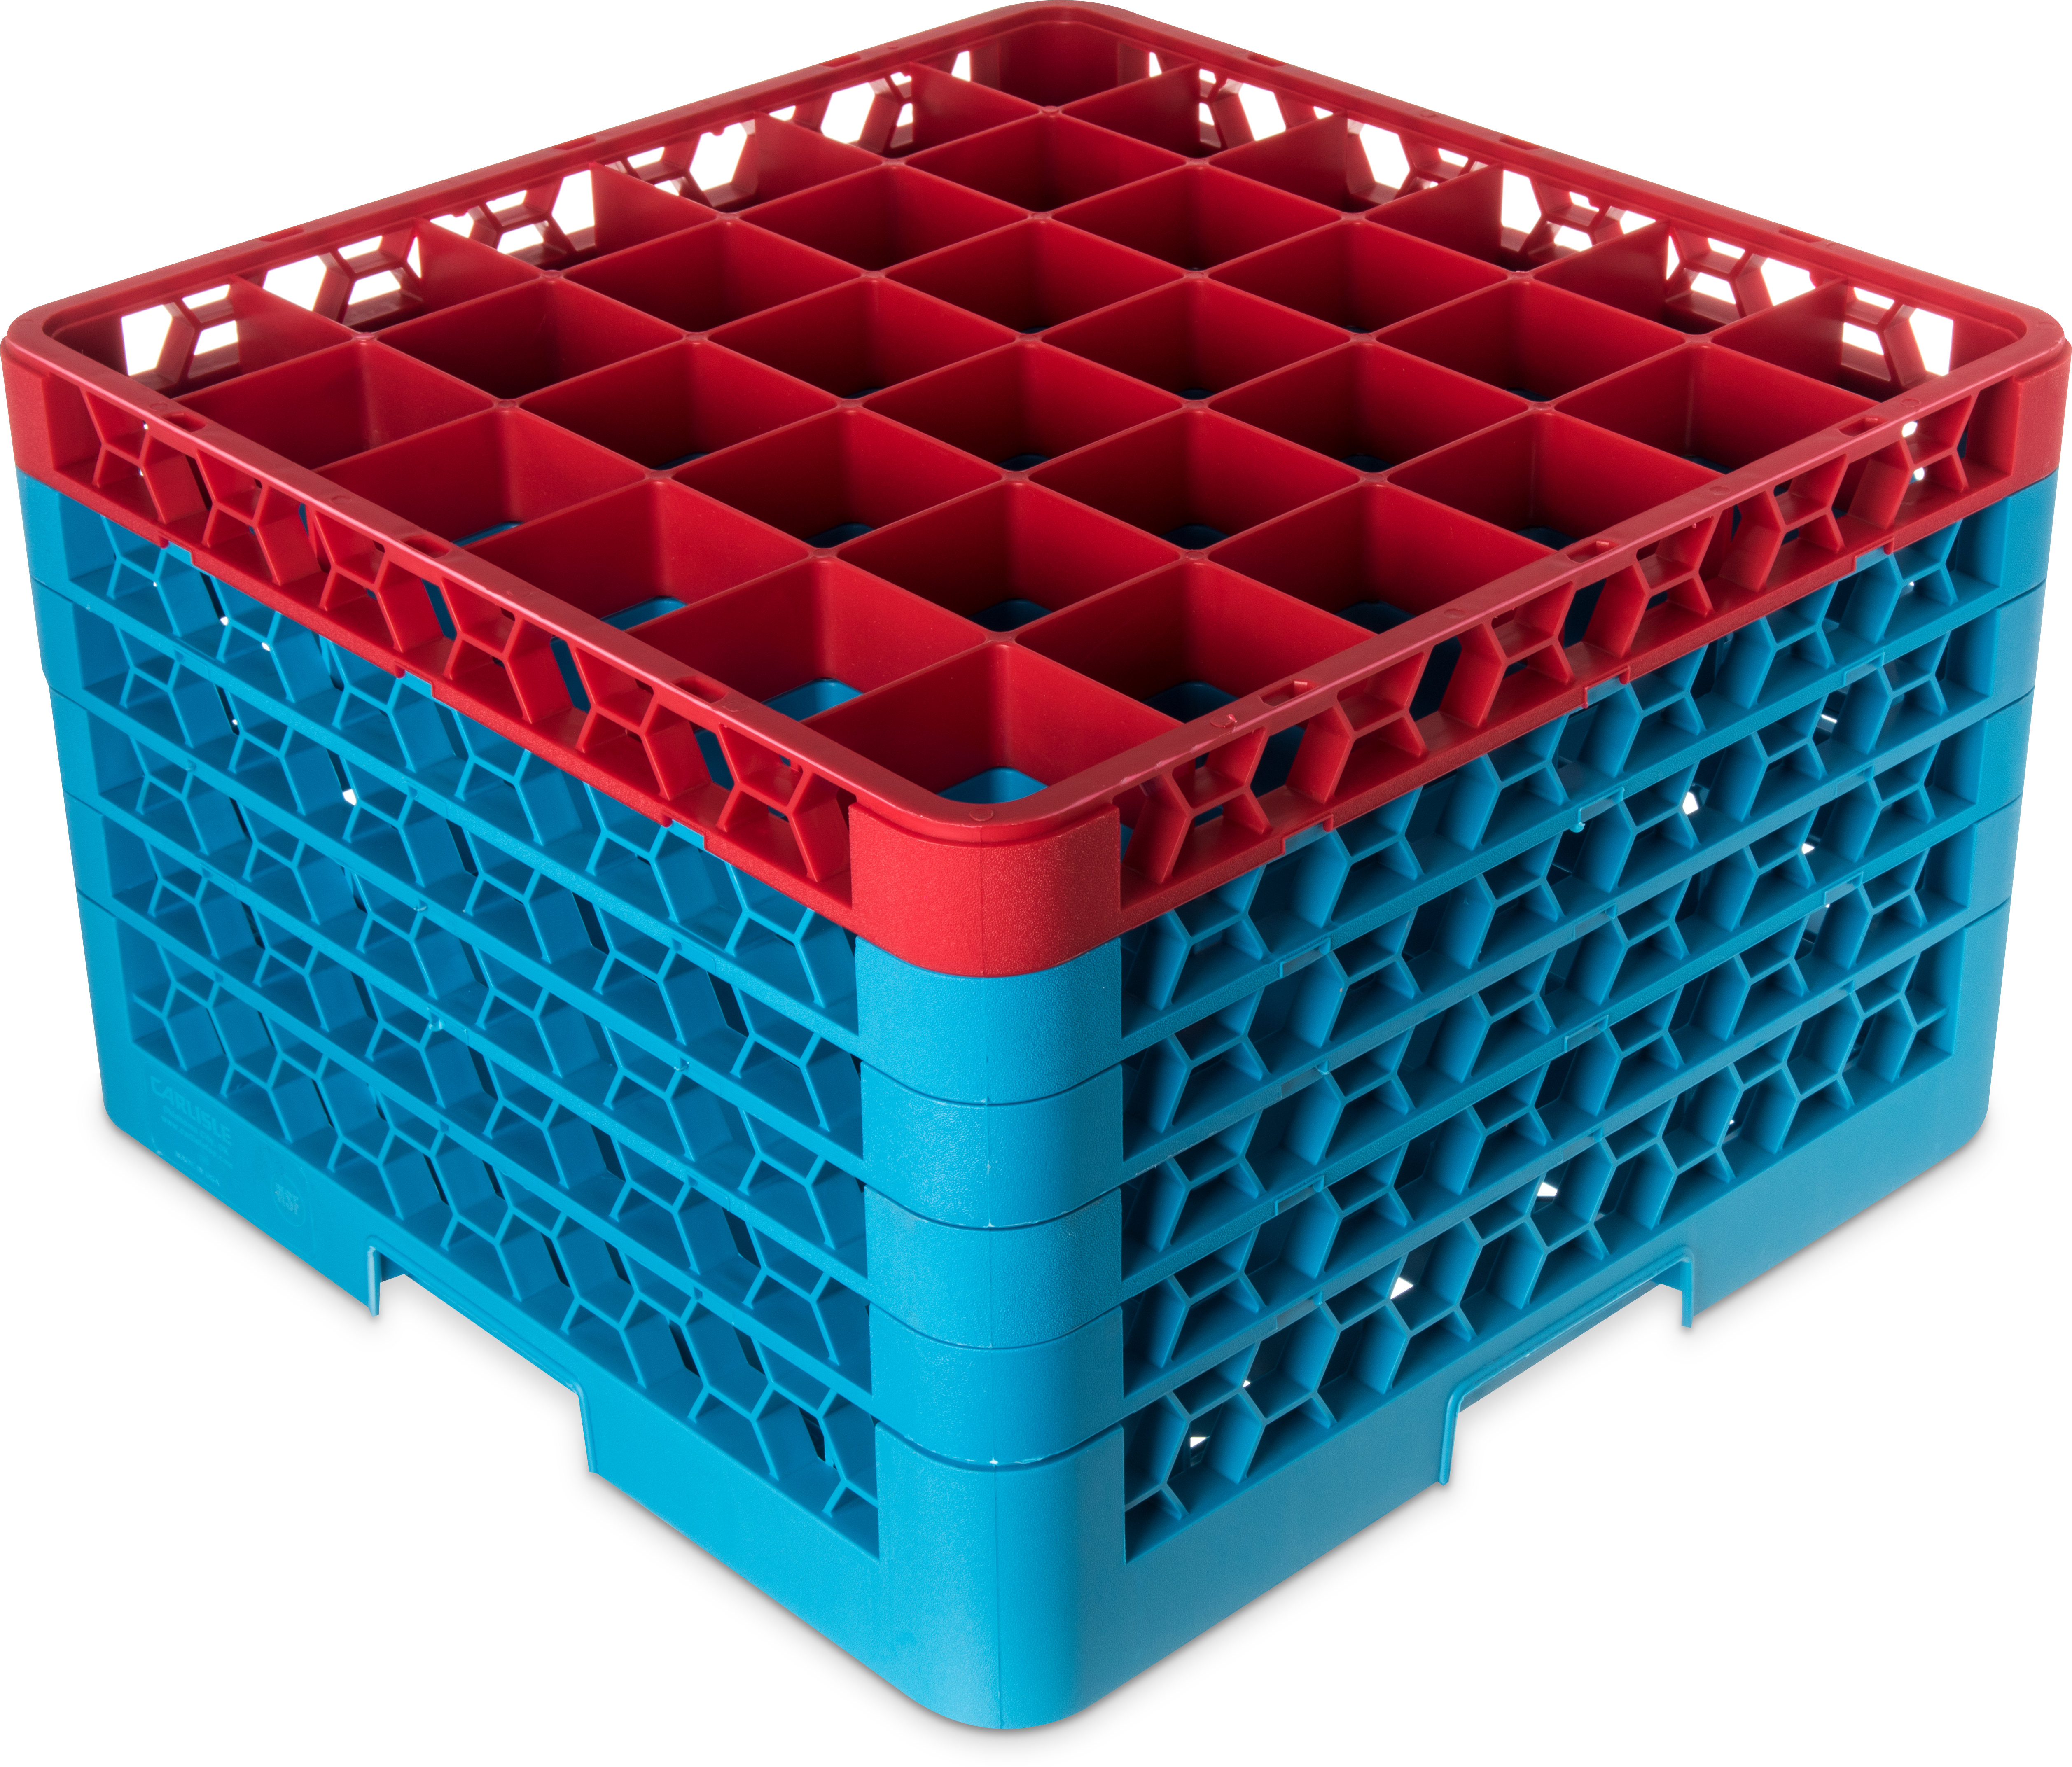 OptiClean 36 Compartment Glass Rack with 5 Extenders 11.9 - Red-Carlisle Blue